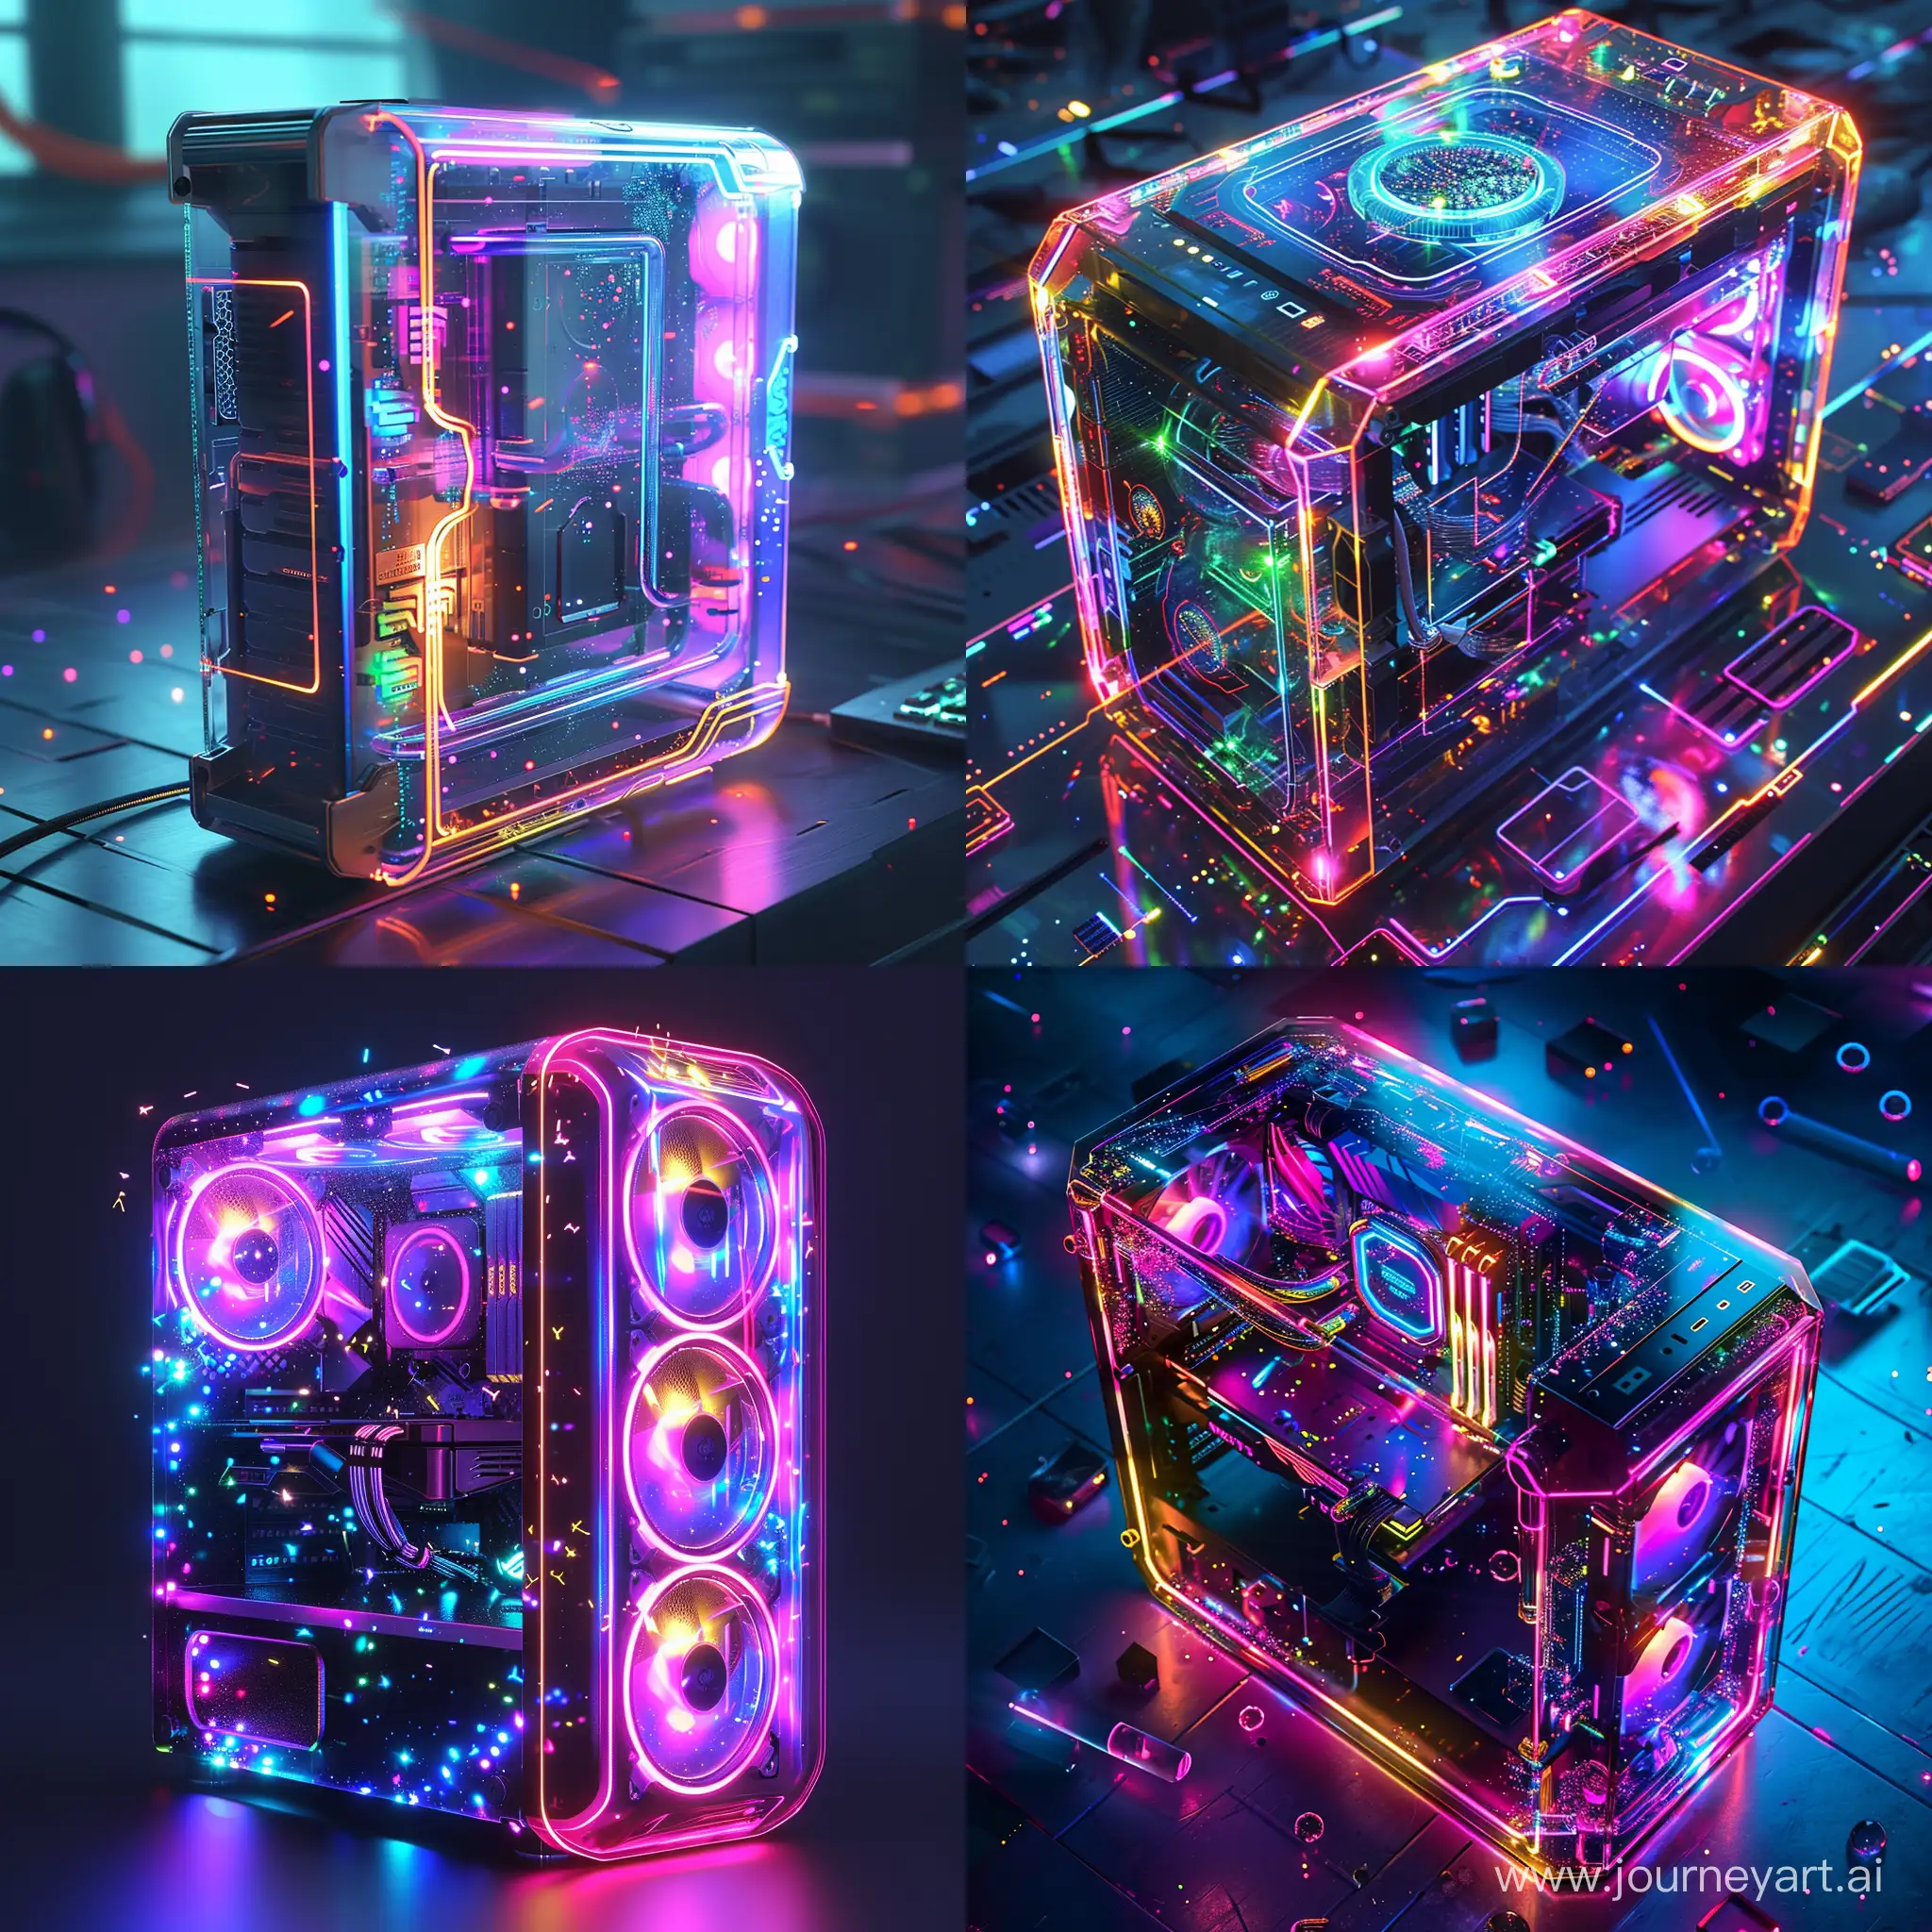 Futuristic-PC-Case-with-Holographic-Organic-LEDs-and-Quantum-Dots